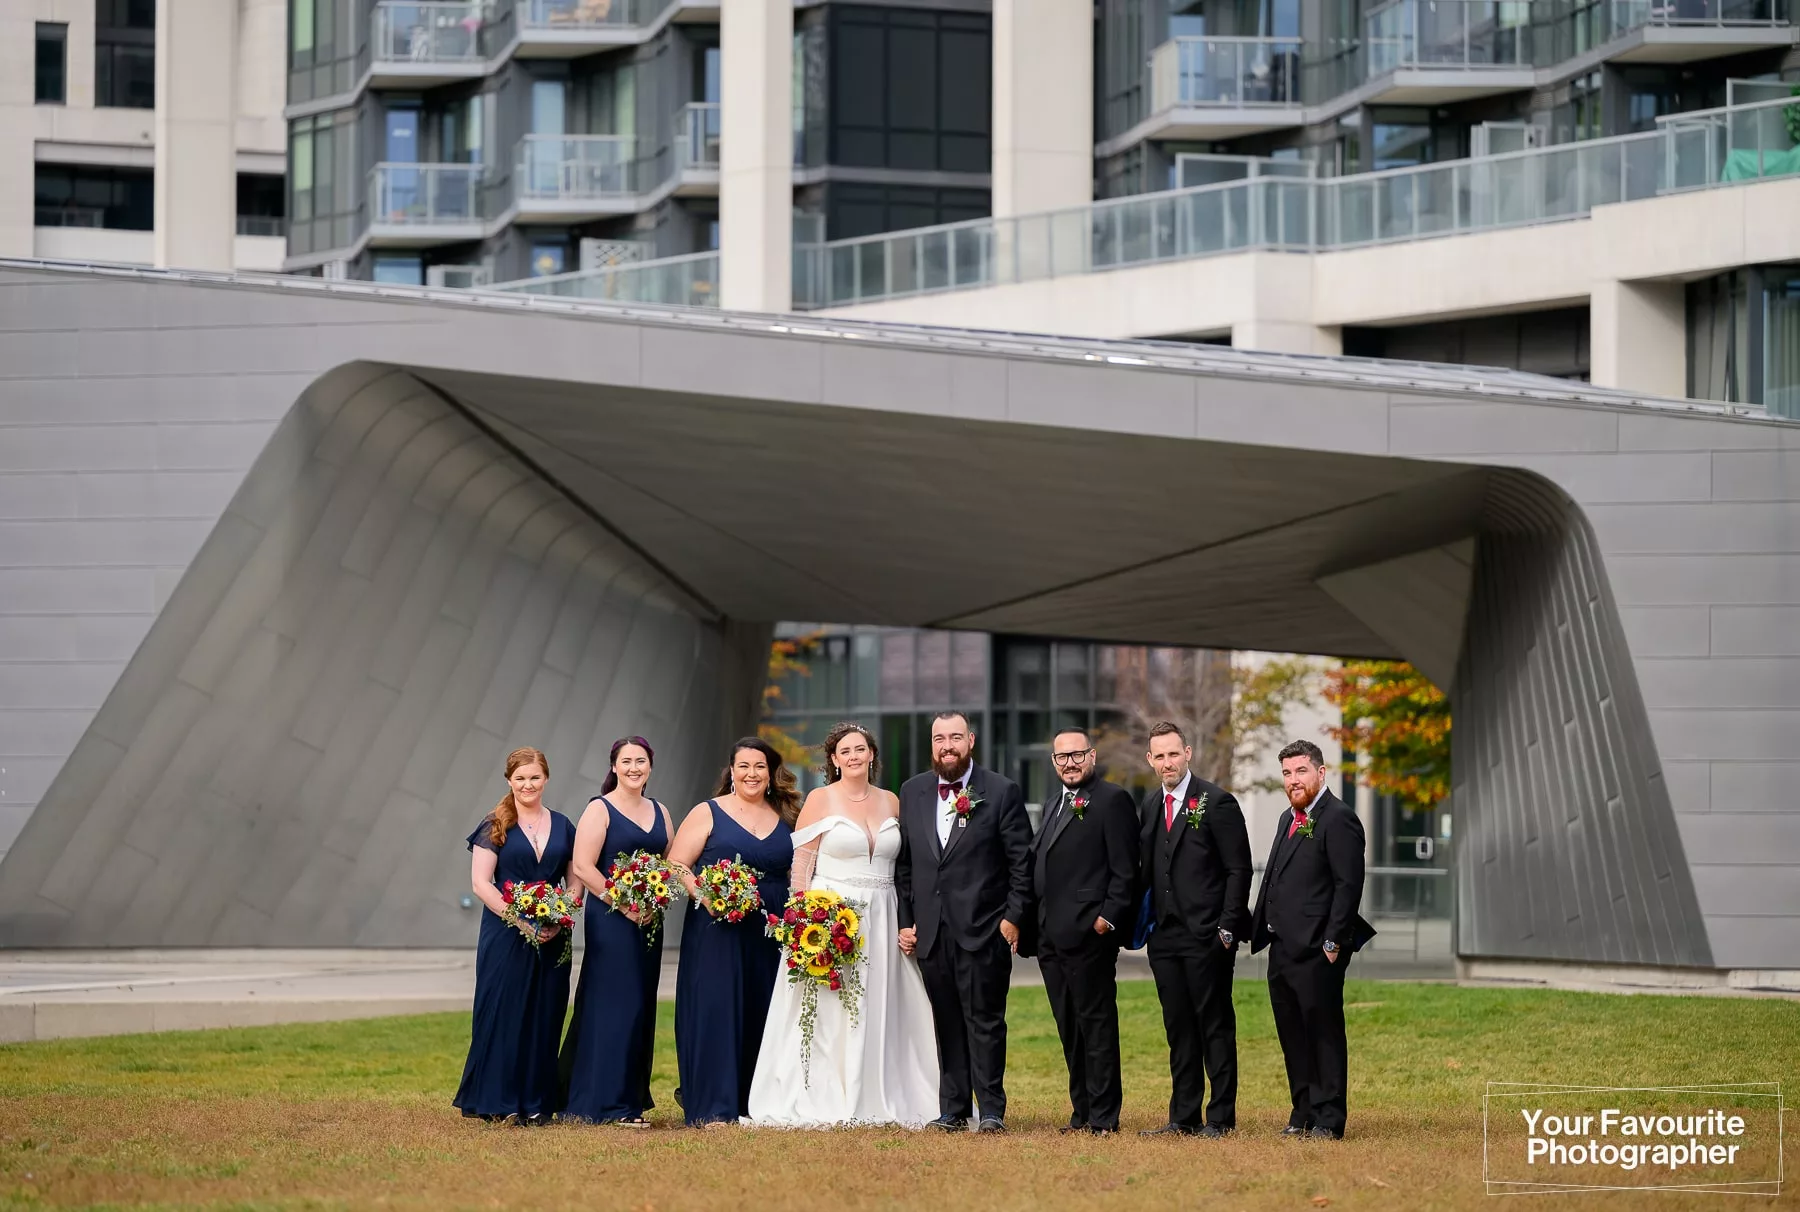 Wide view of a wedding party standing in front of the pavilion at Sherbourne Common in downtown Toronto